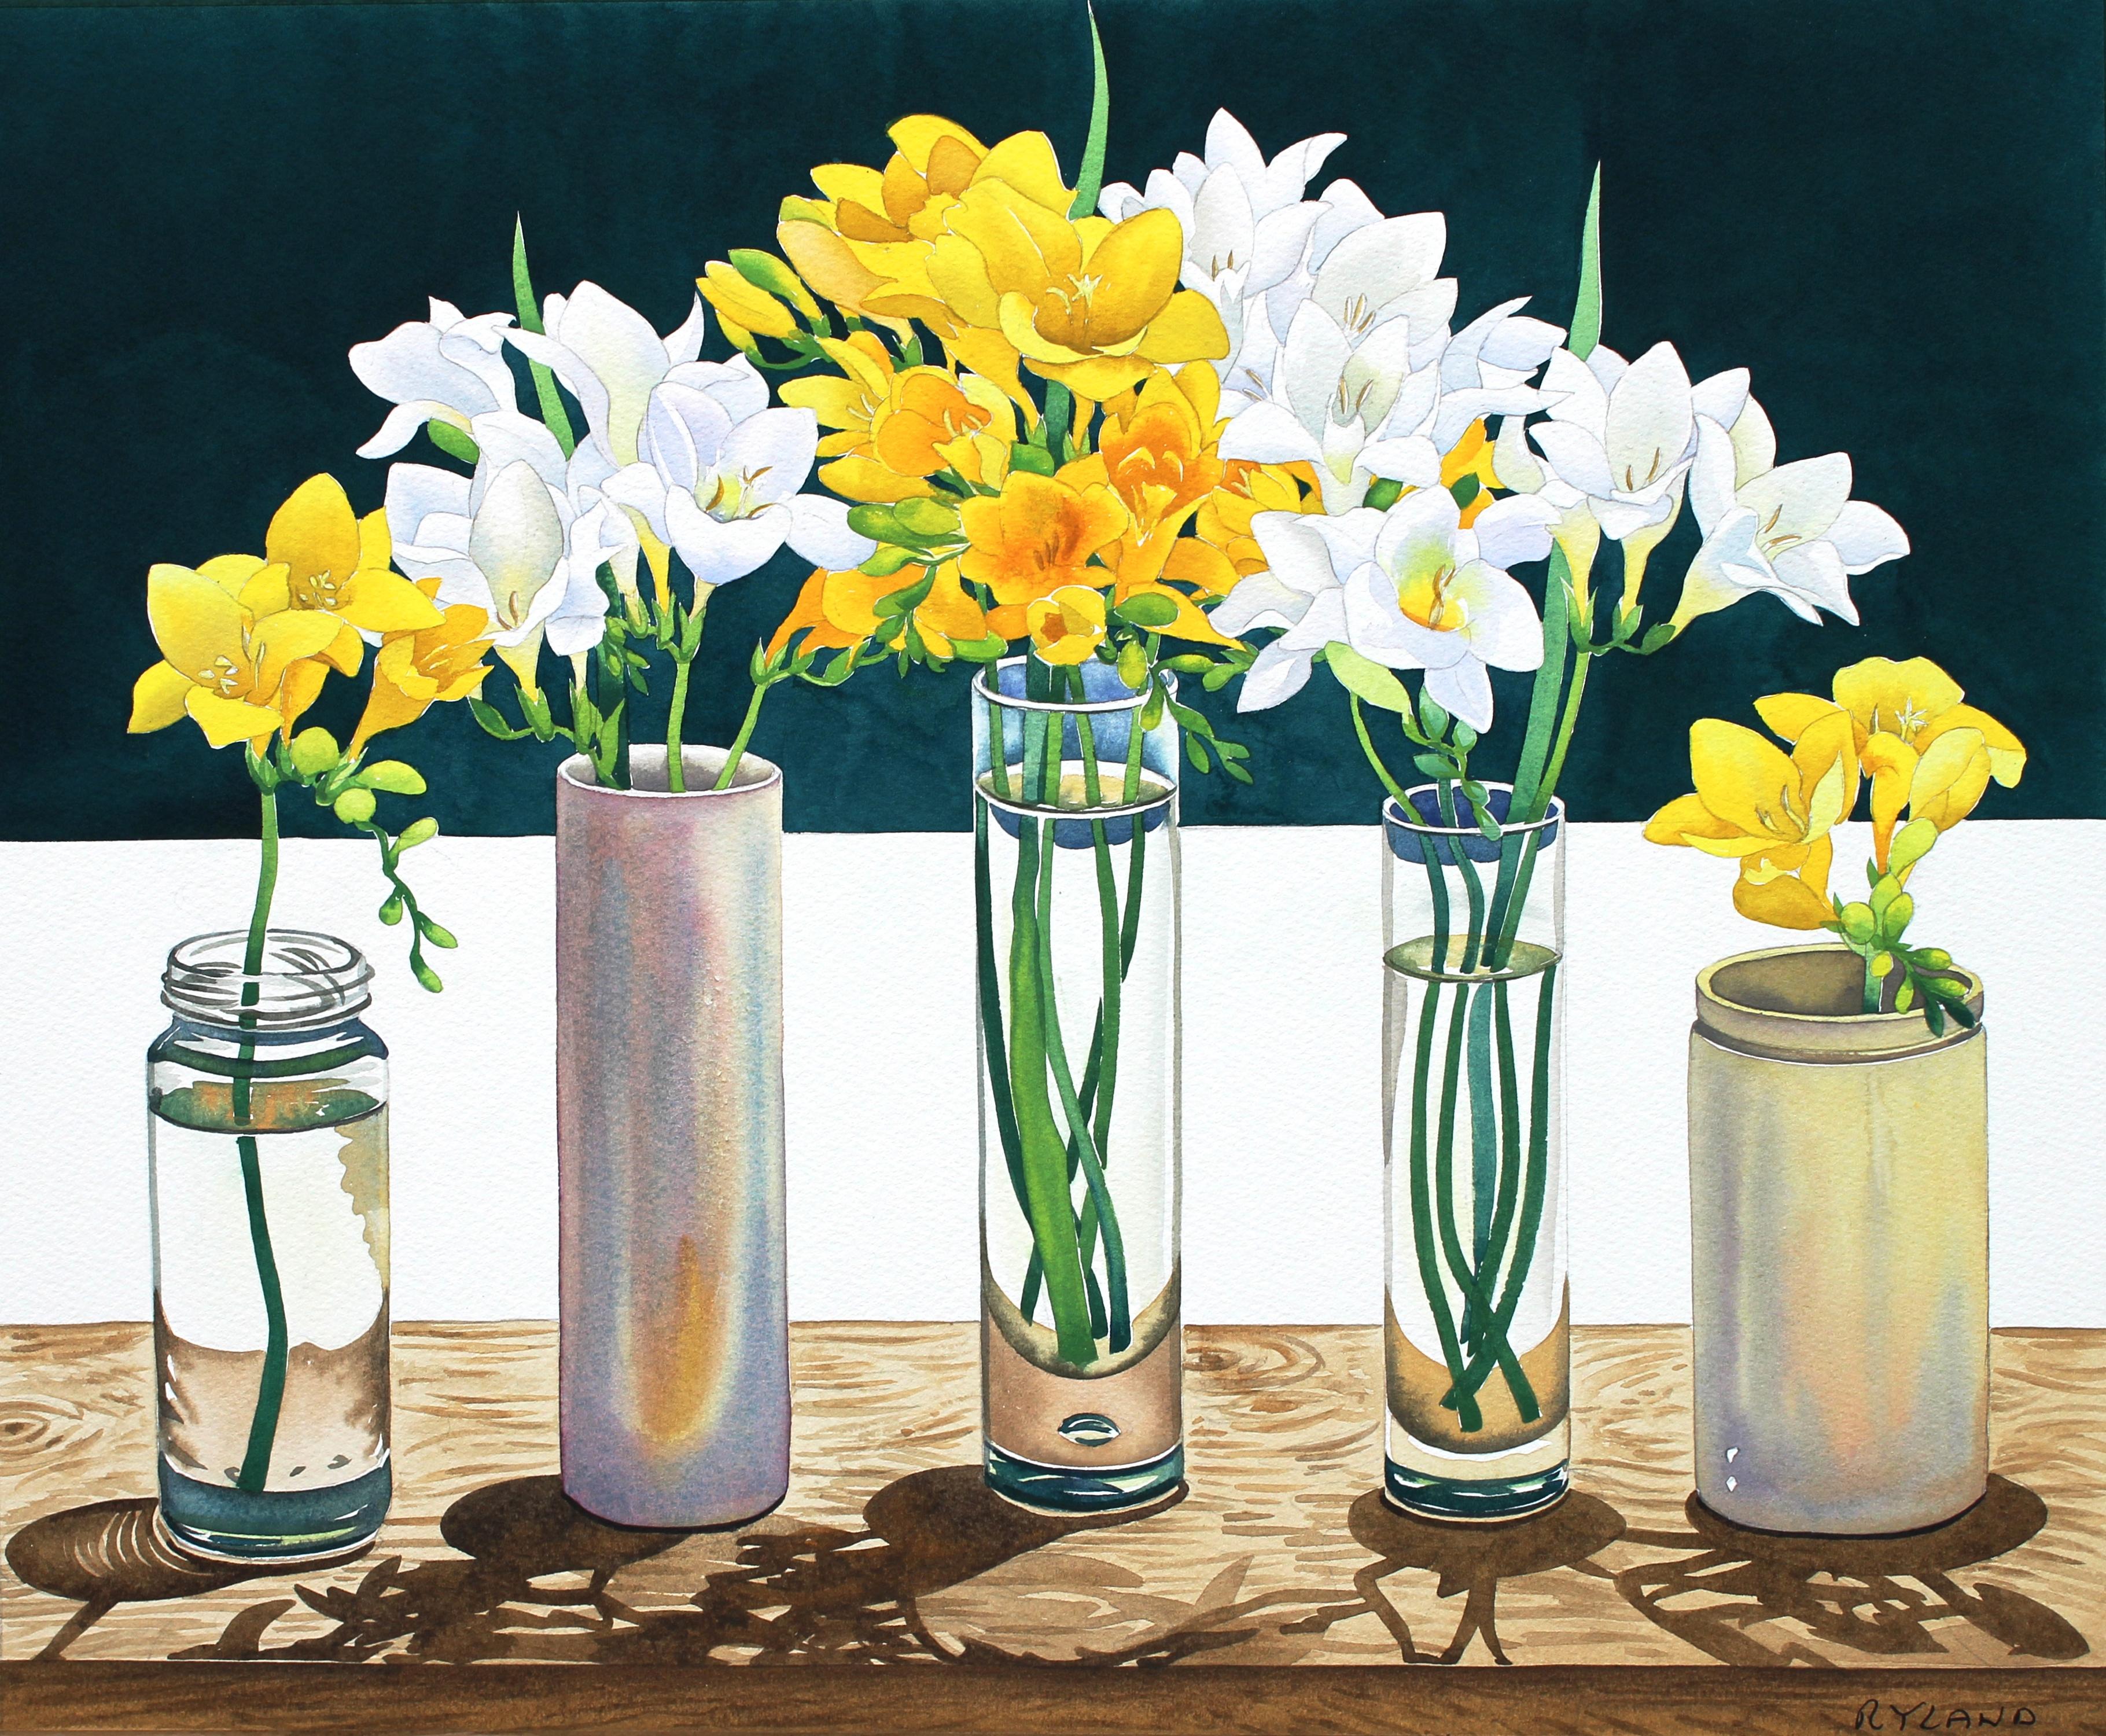 Christopher Ryland, Contemporary Still life of Freesias